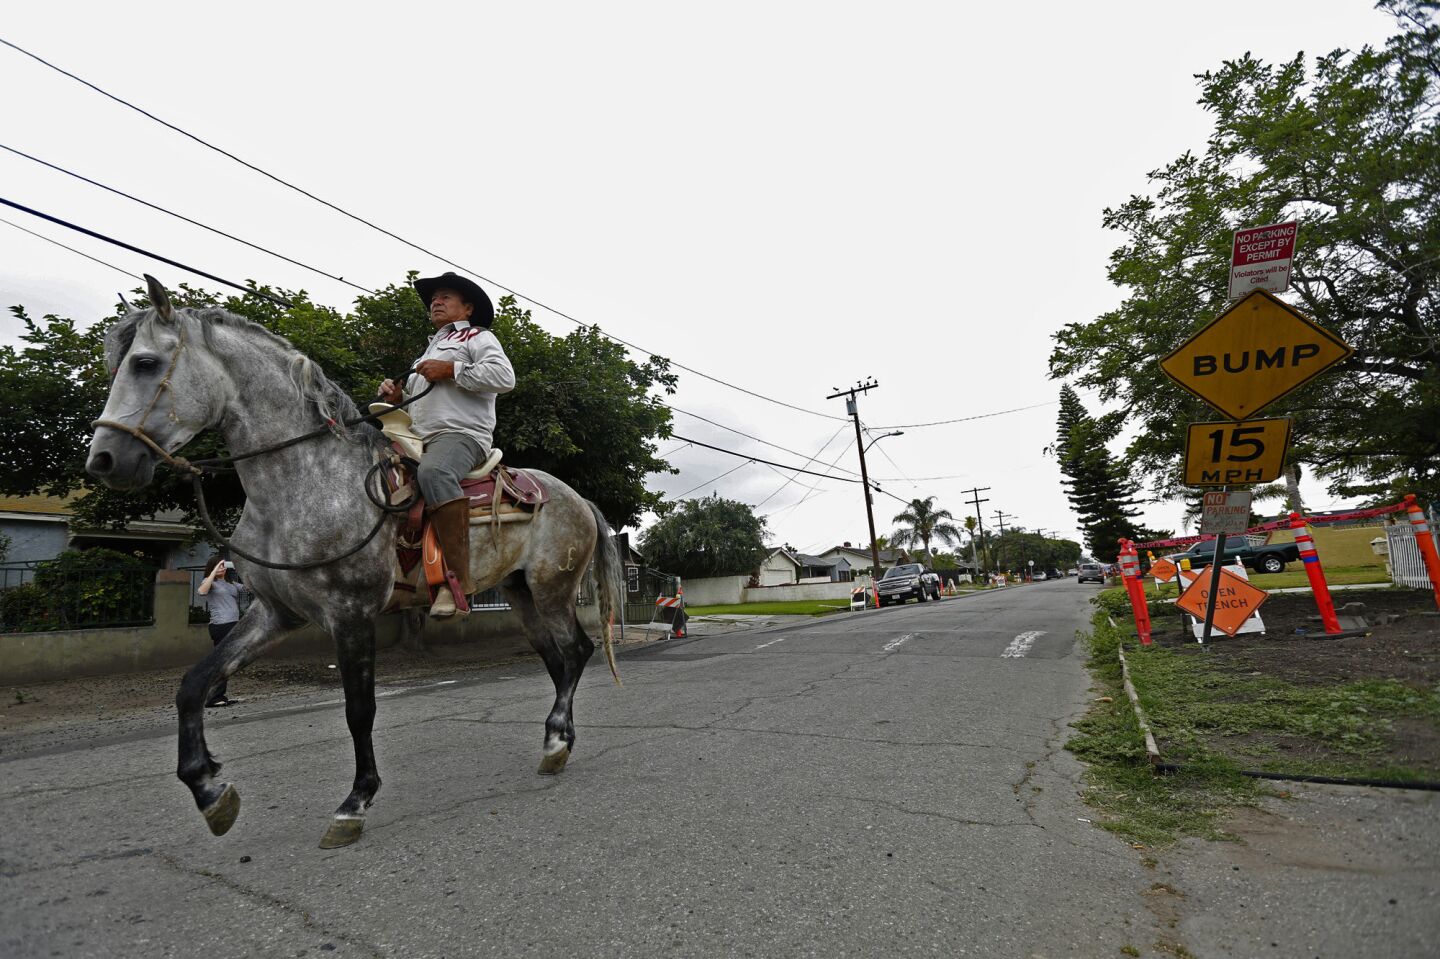 Jesus Sevilla rides his horse down West Caldwell Street where one of four killings occurred over the weekend of May 14-15, 2016, in Compton.